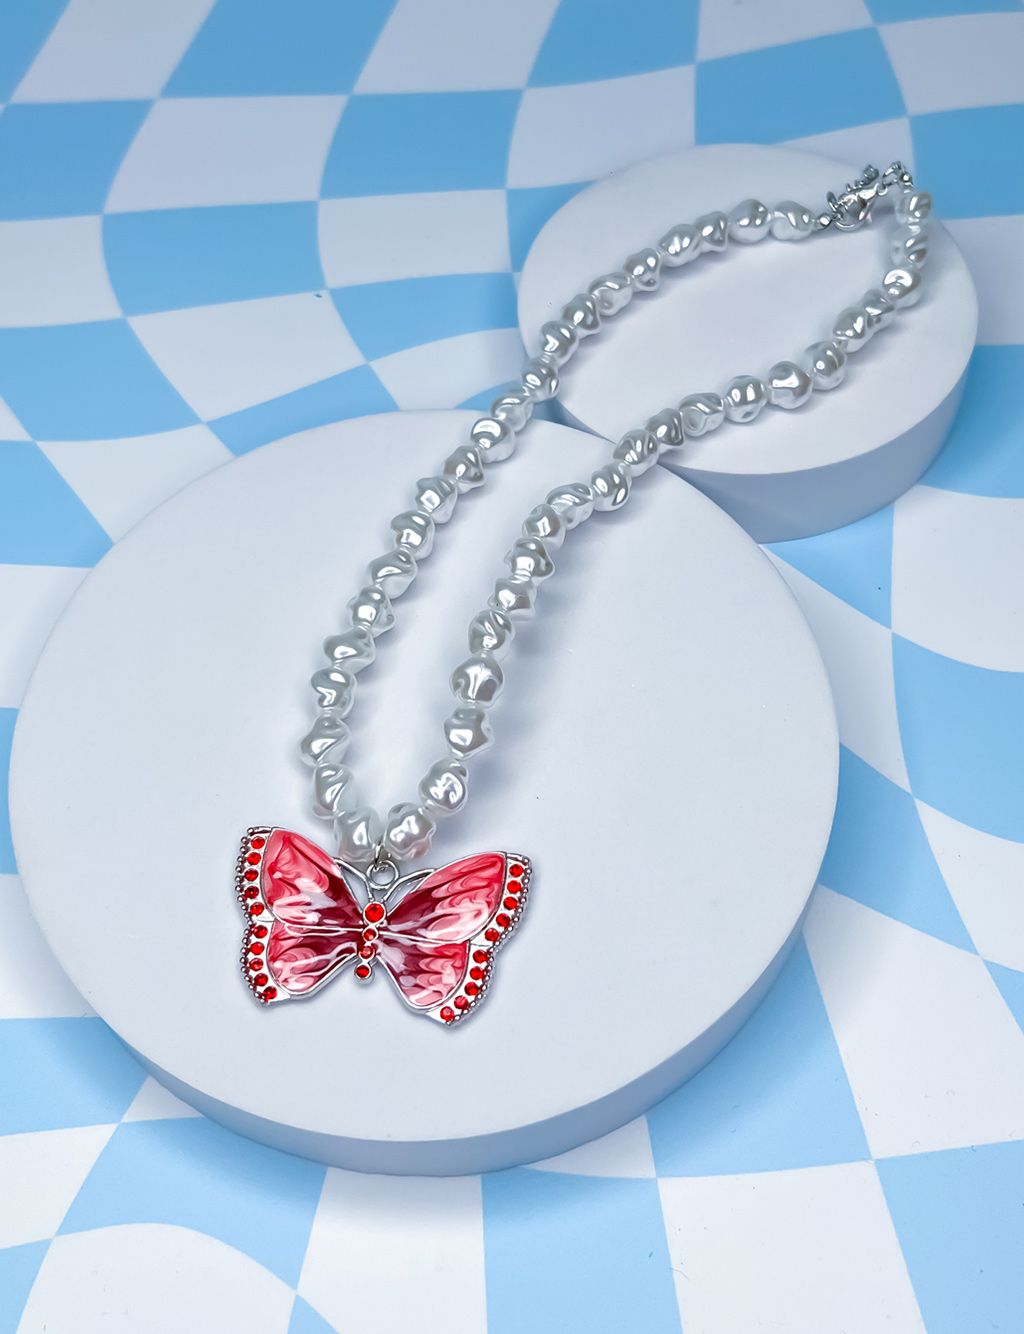 BUTTERFLY MAGIC NECKLACE - RED